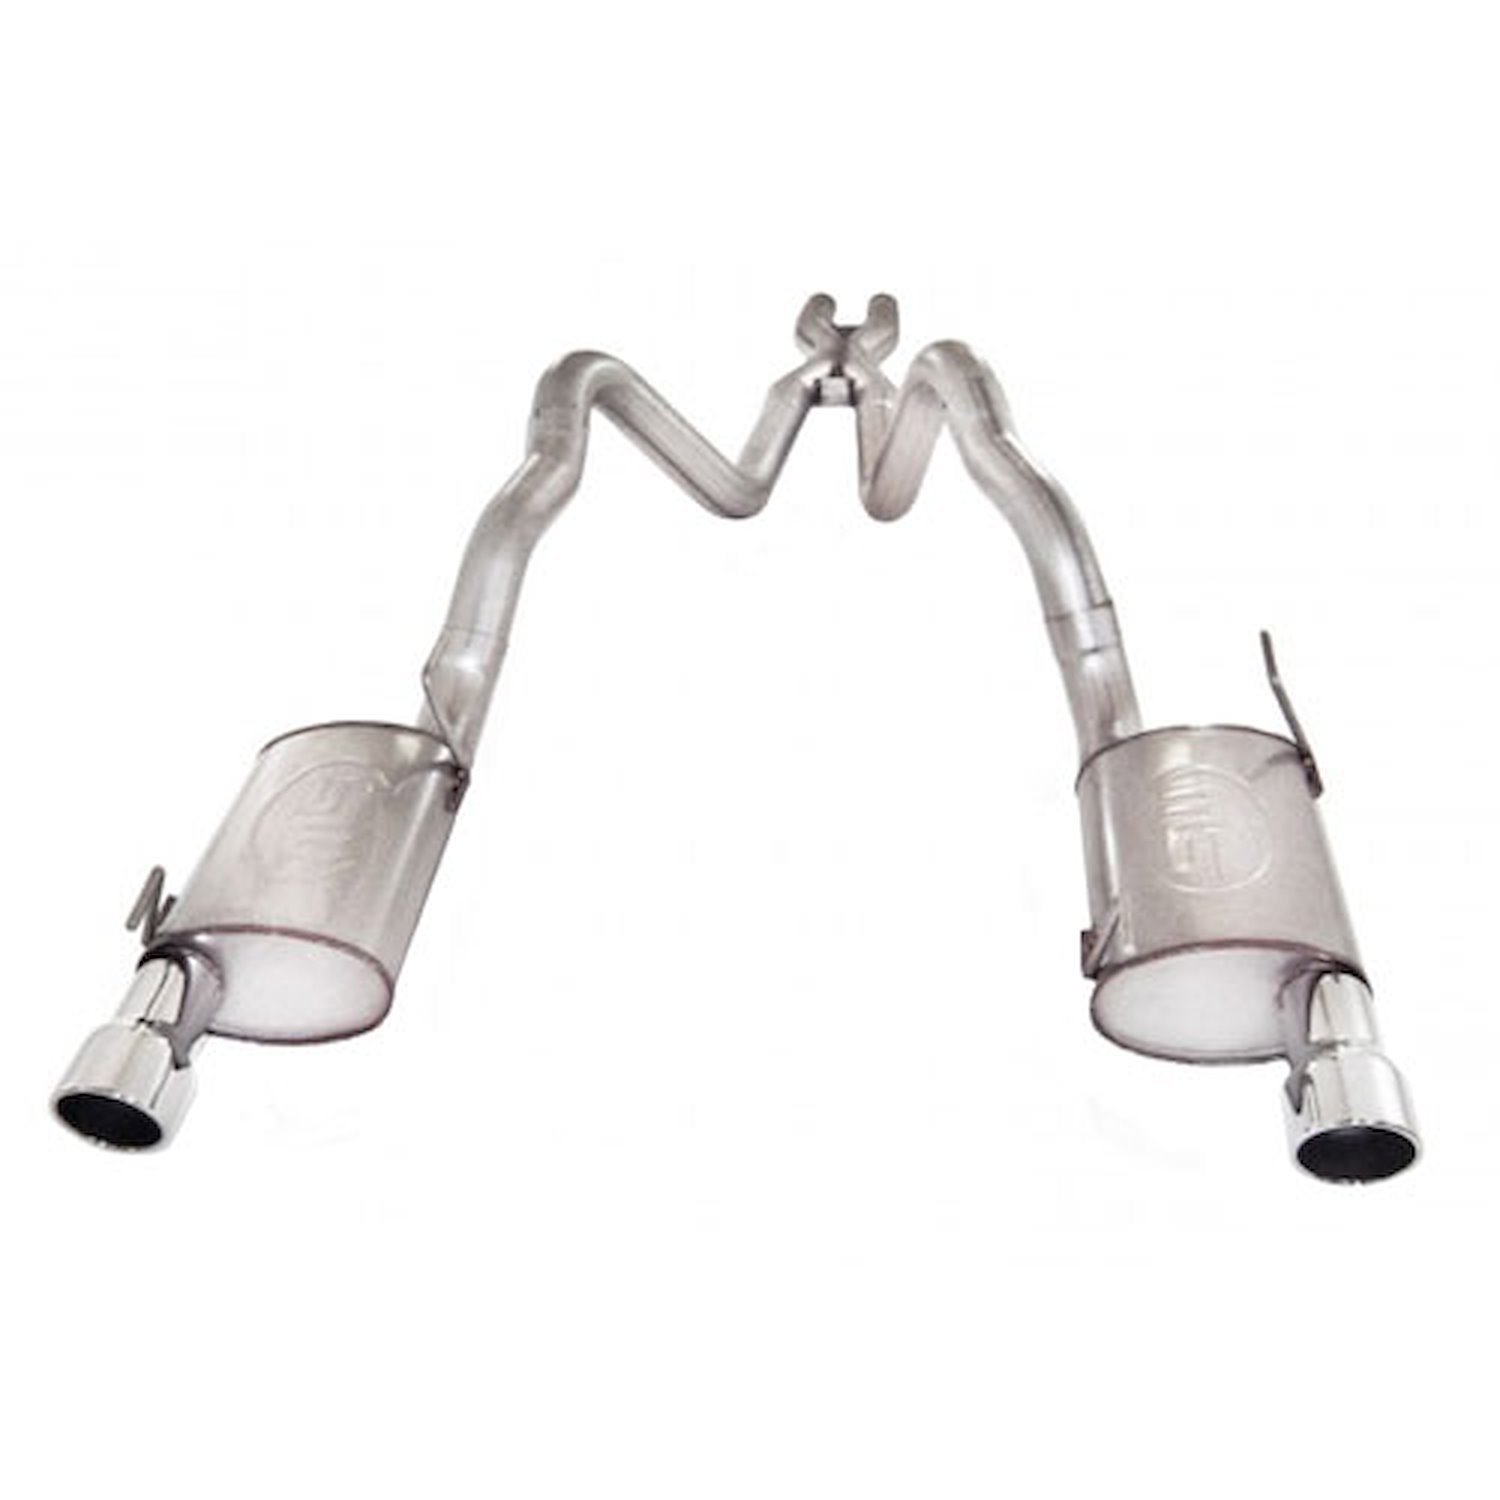 2005-2009 Mustang GT 3 Cat back exhaust system. Includes 2 3 inlet 3 outlet 2.5 core s-tube turbo mu